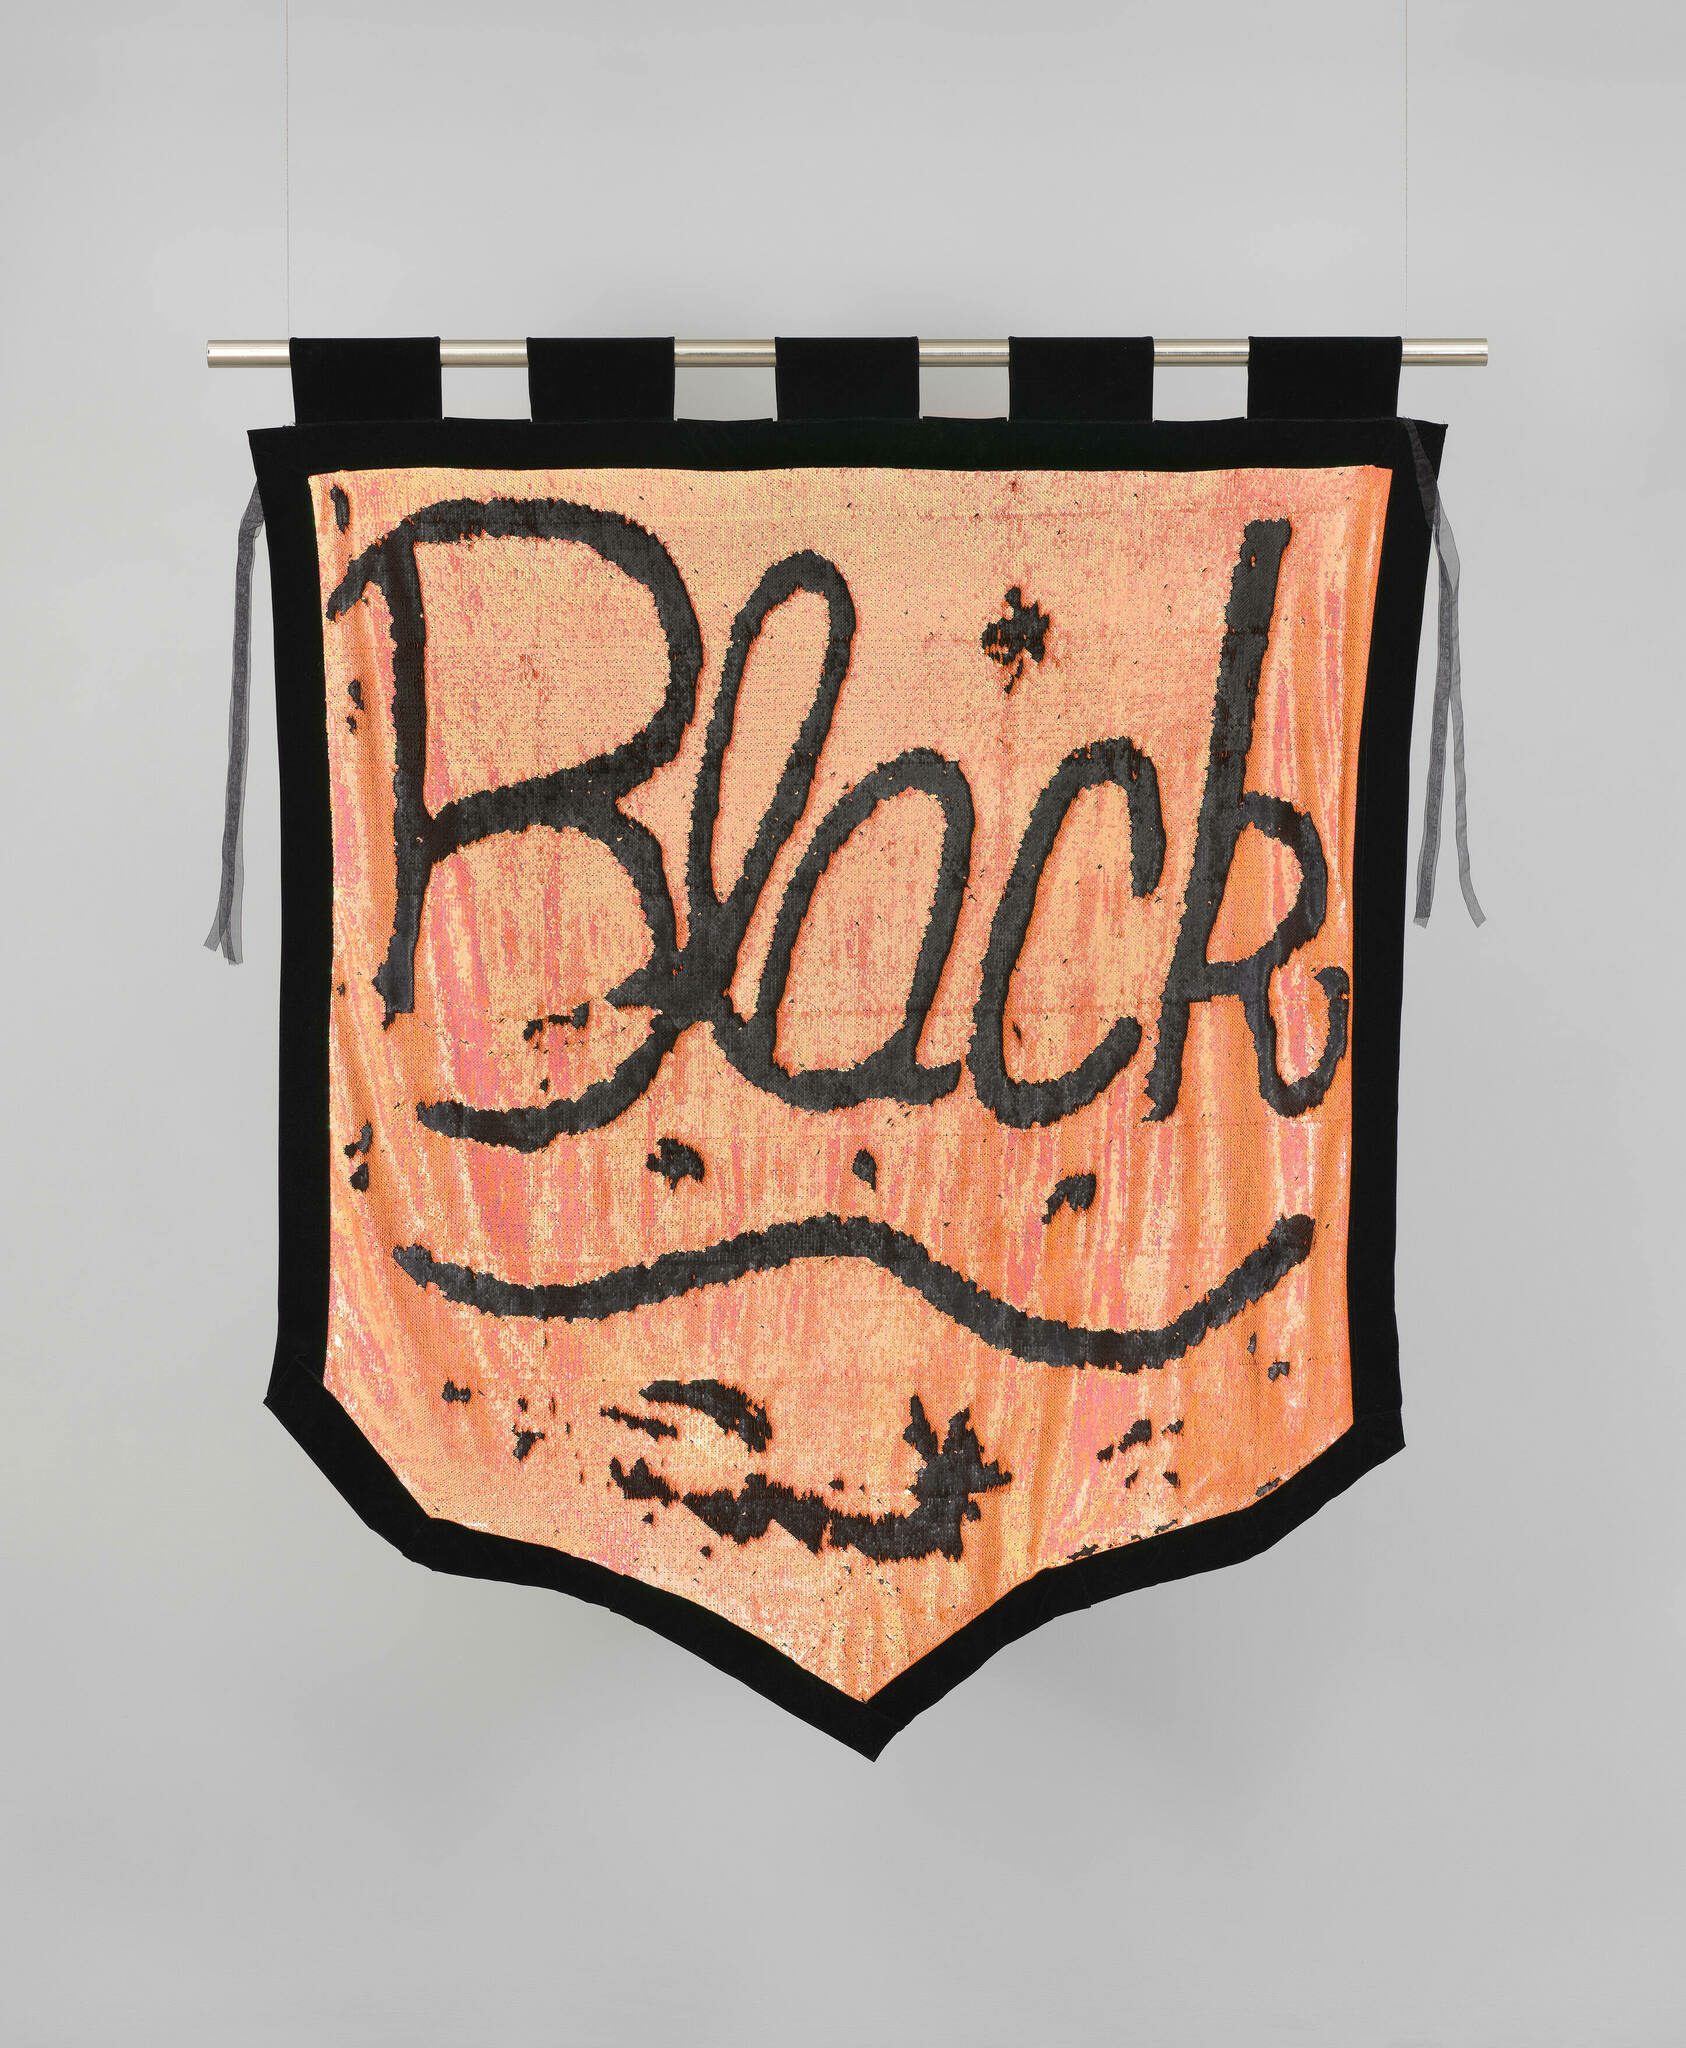 On a velvet orange banner with a black border, the word Black is written in script and underlined